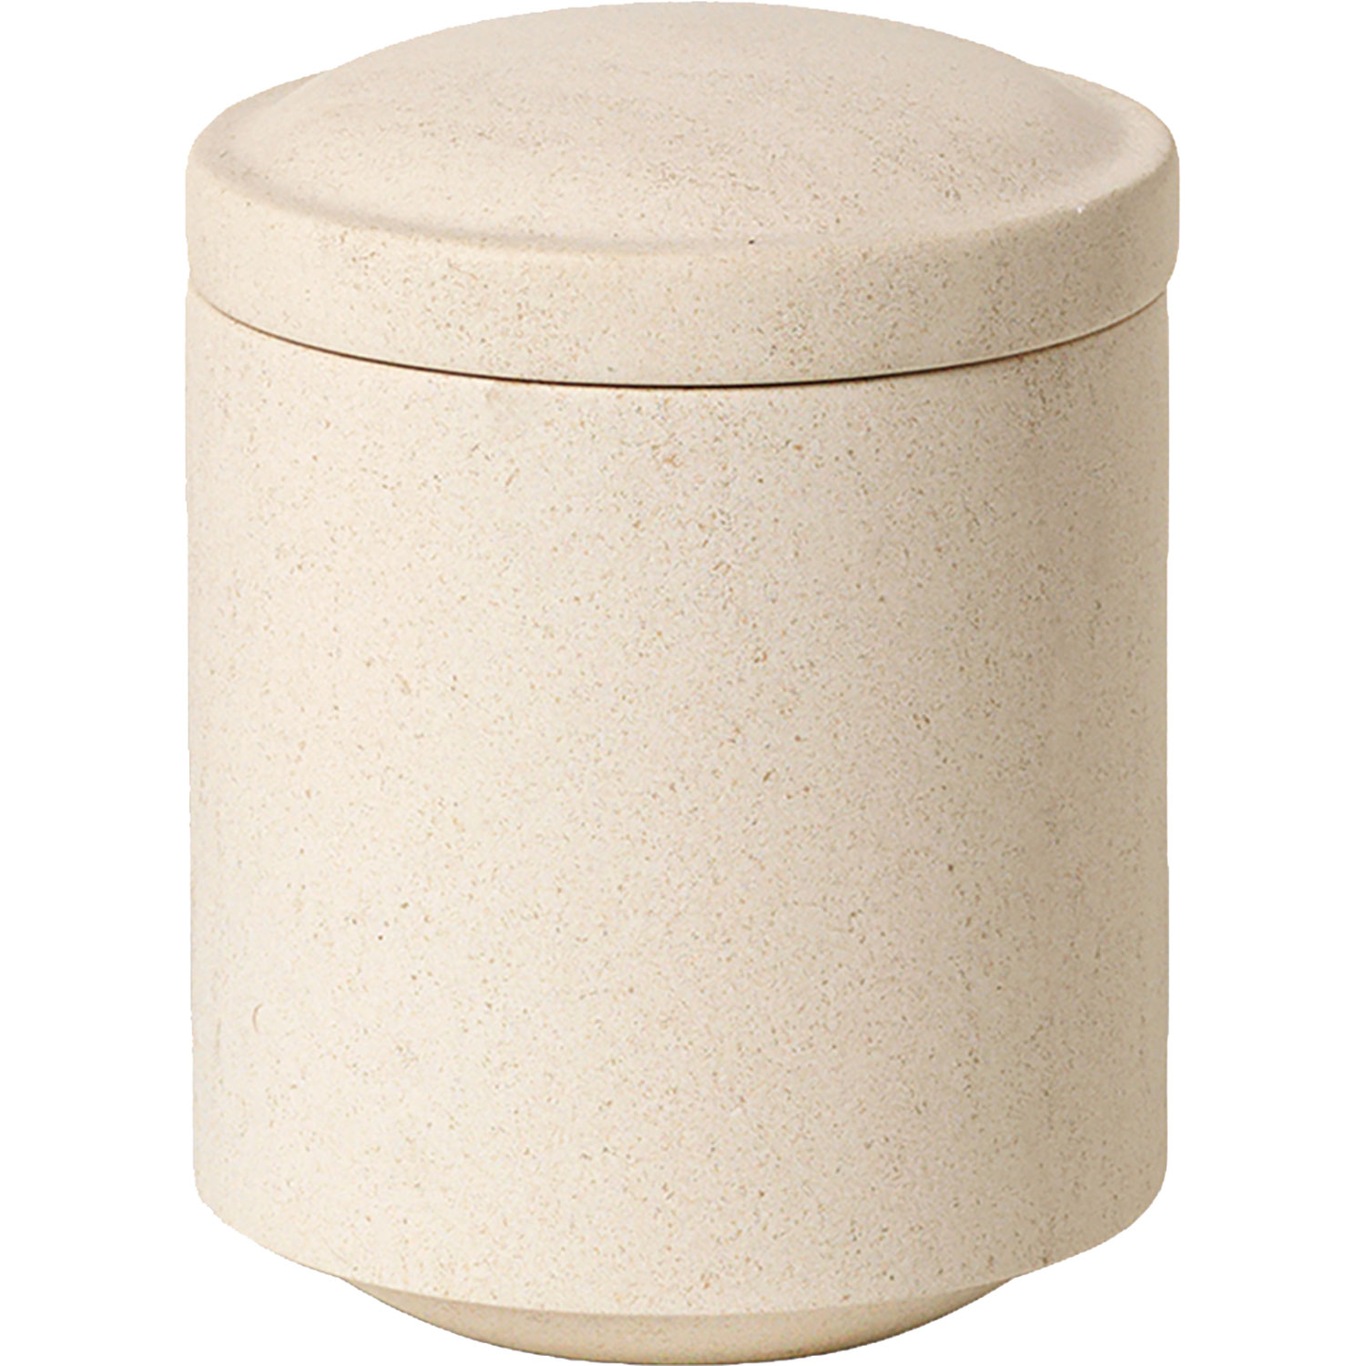 Gallery Objects Jar 14 cm, Lime Stone